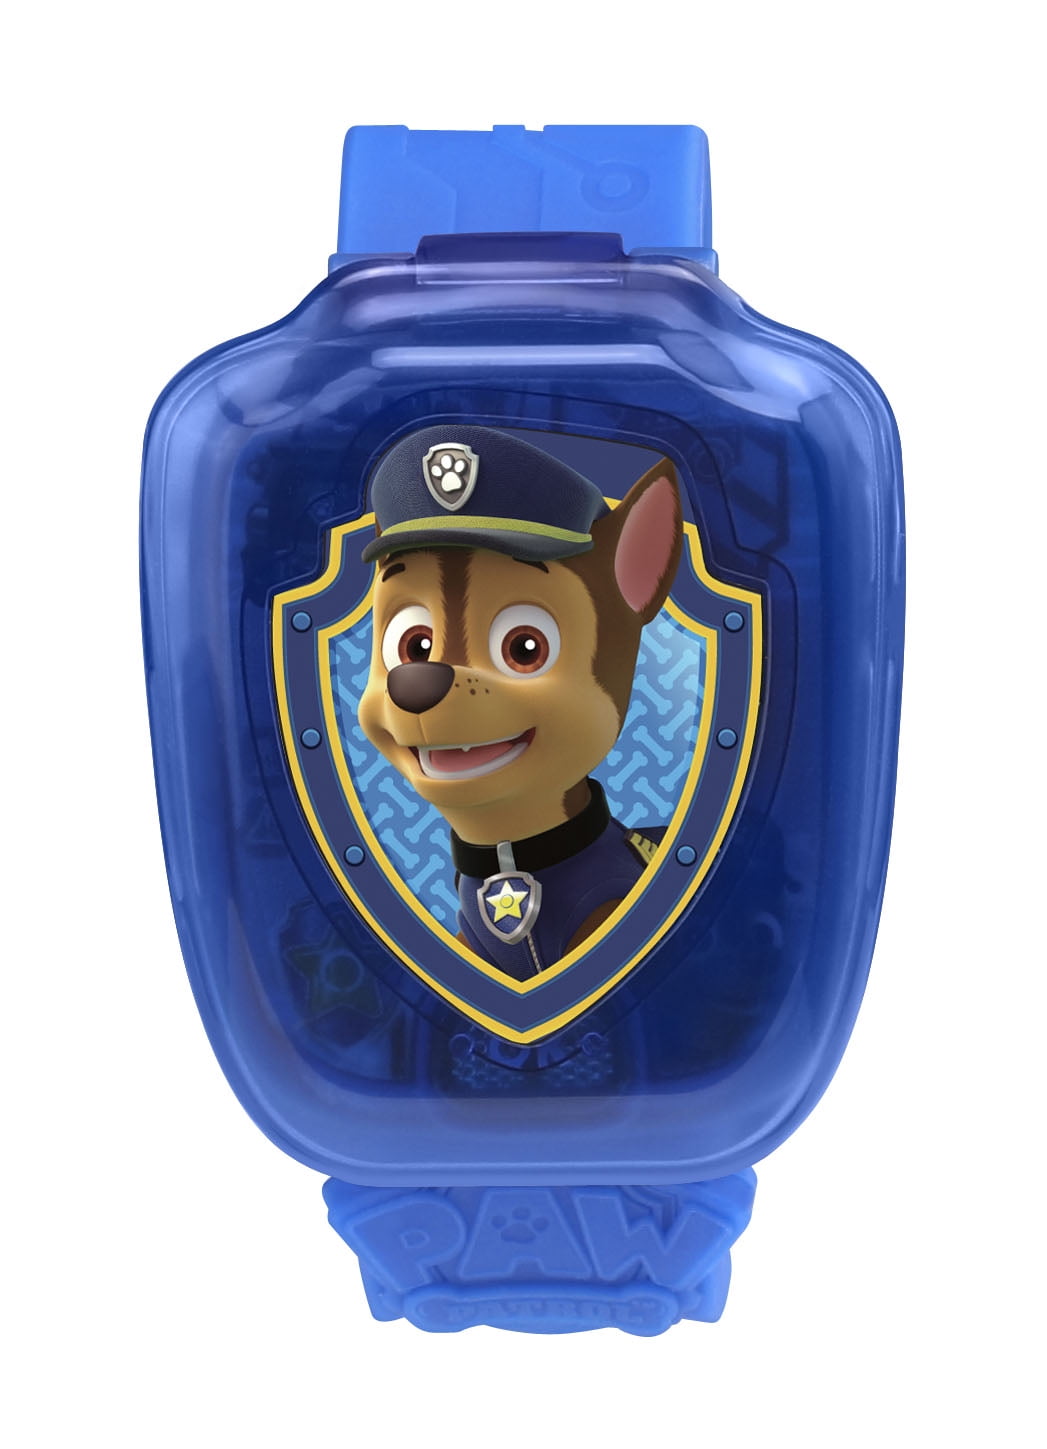 paw patrol toys and games